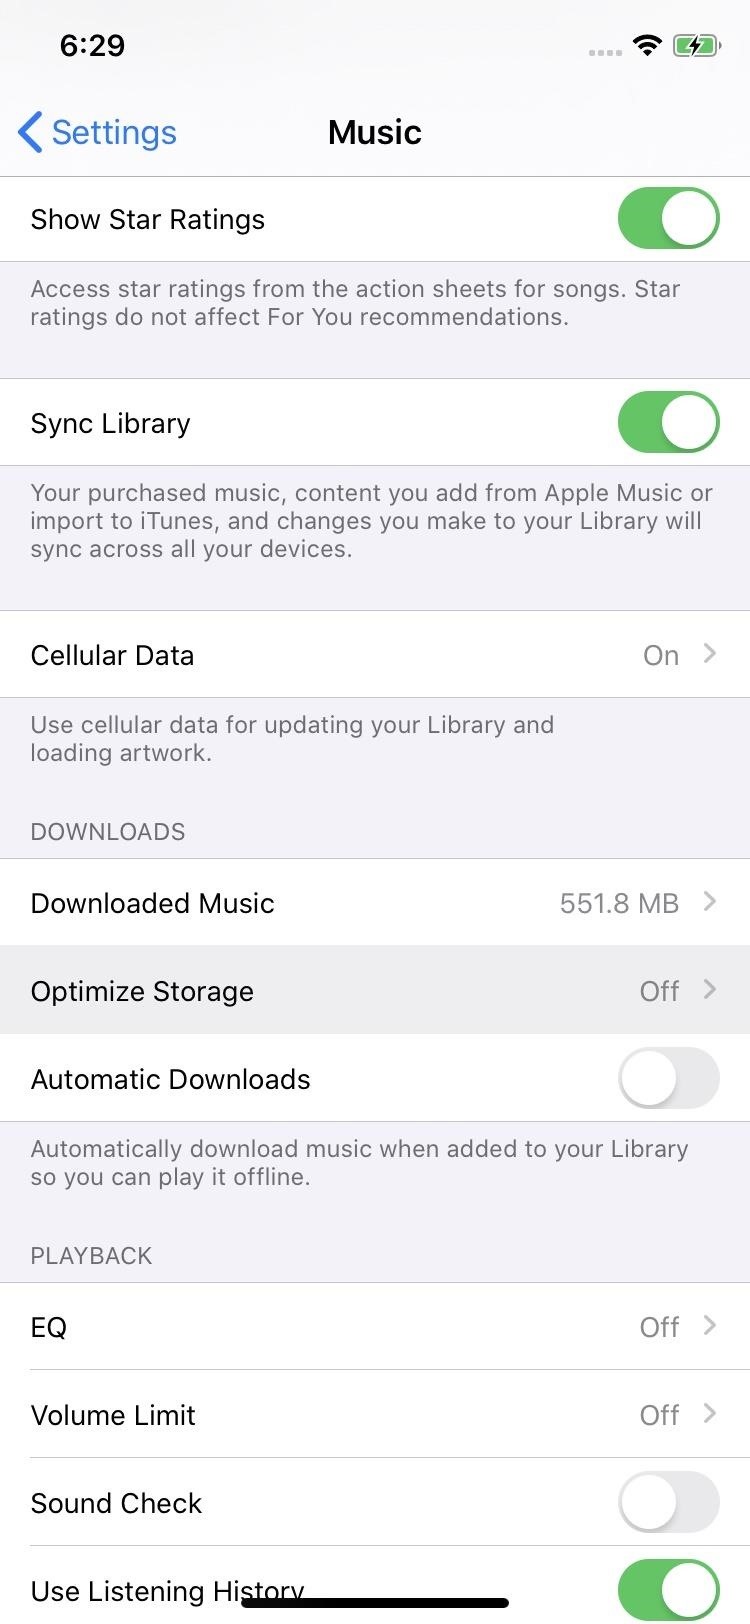 How to Automatically Delete Unwanted Apple Music Songs When Your iPhone's Low on Space